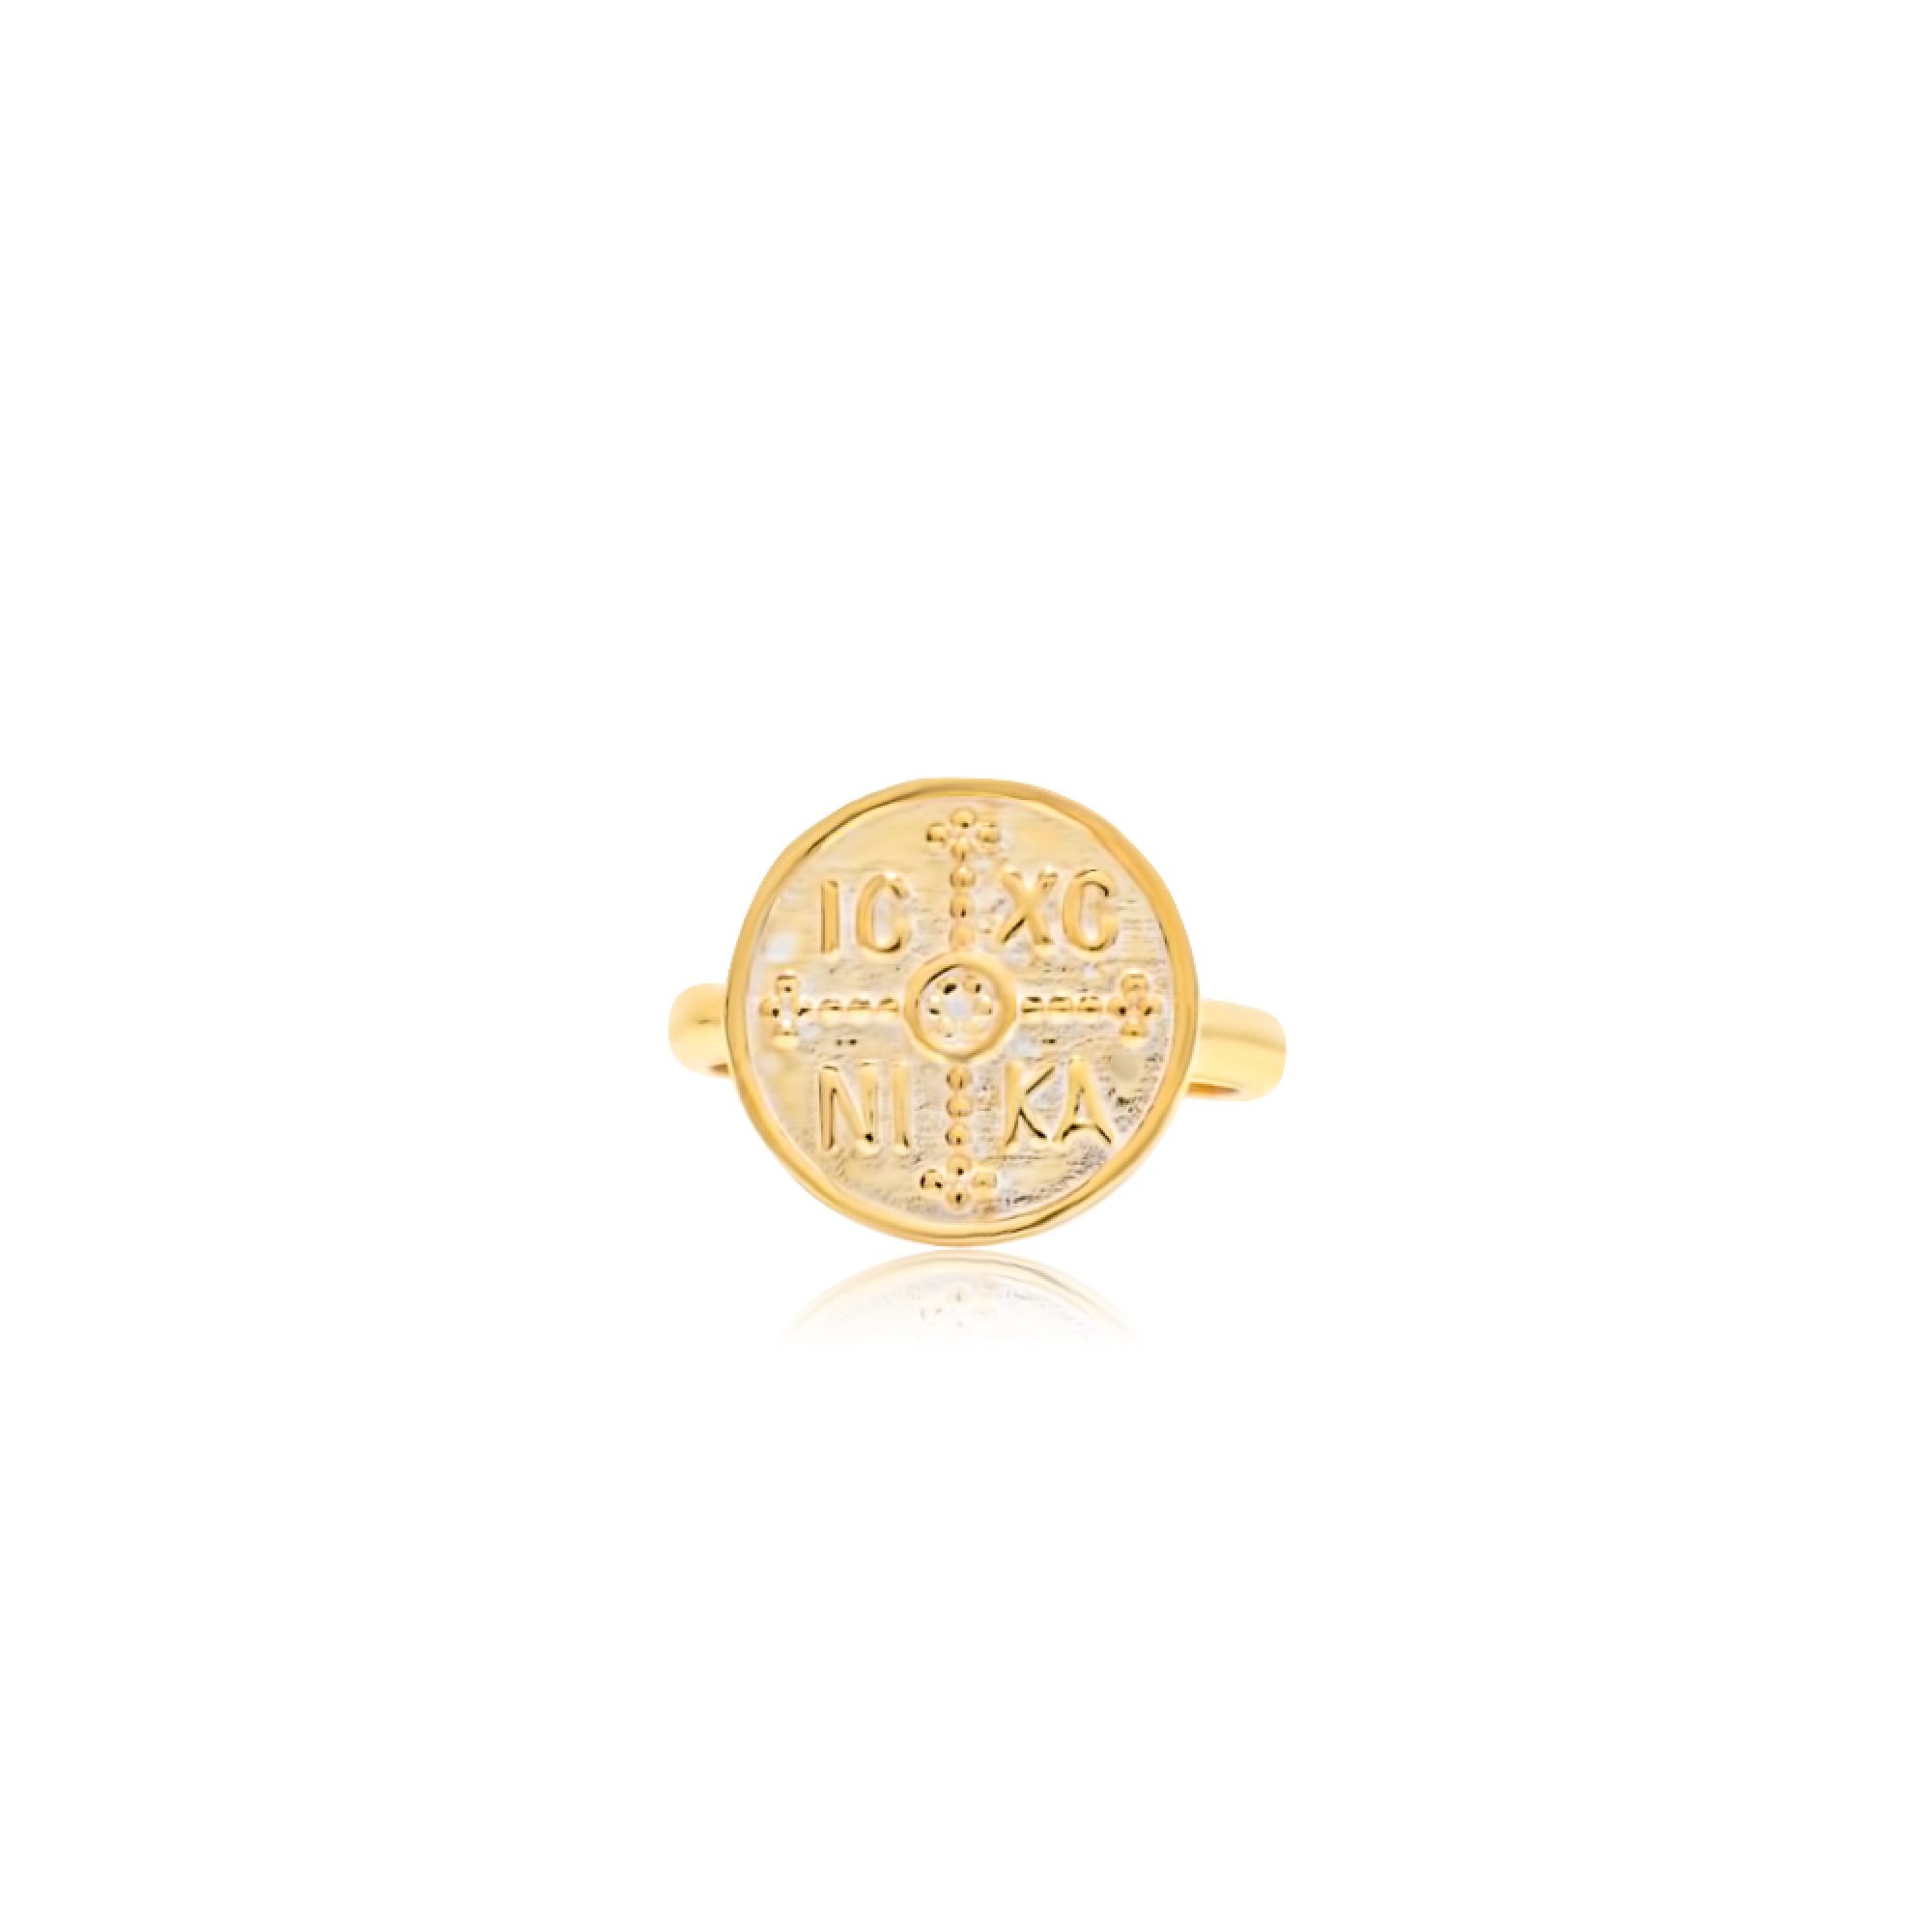 Gold plated constantine ring